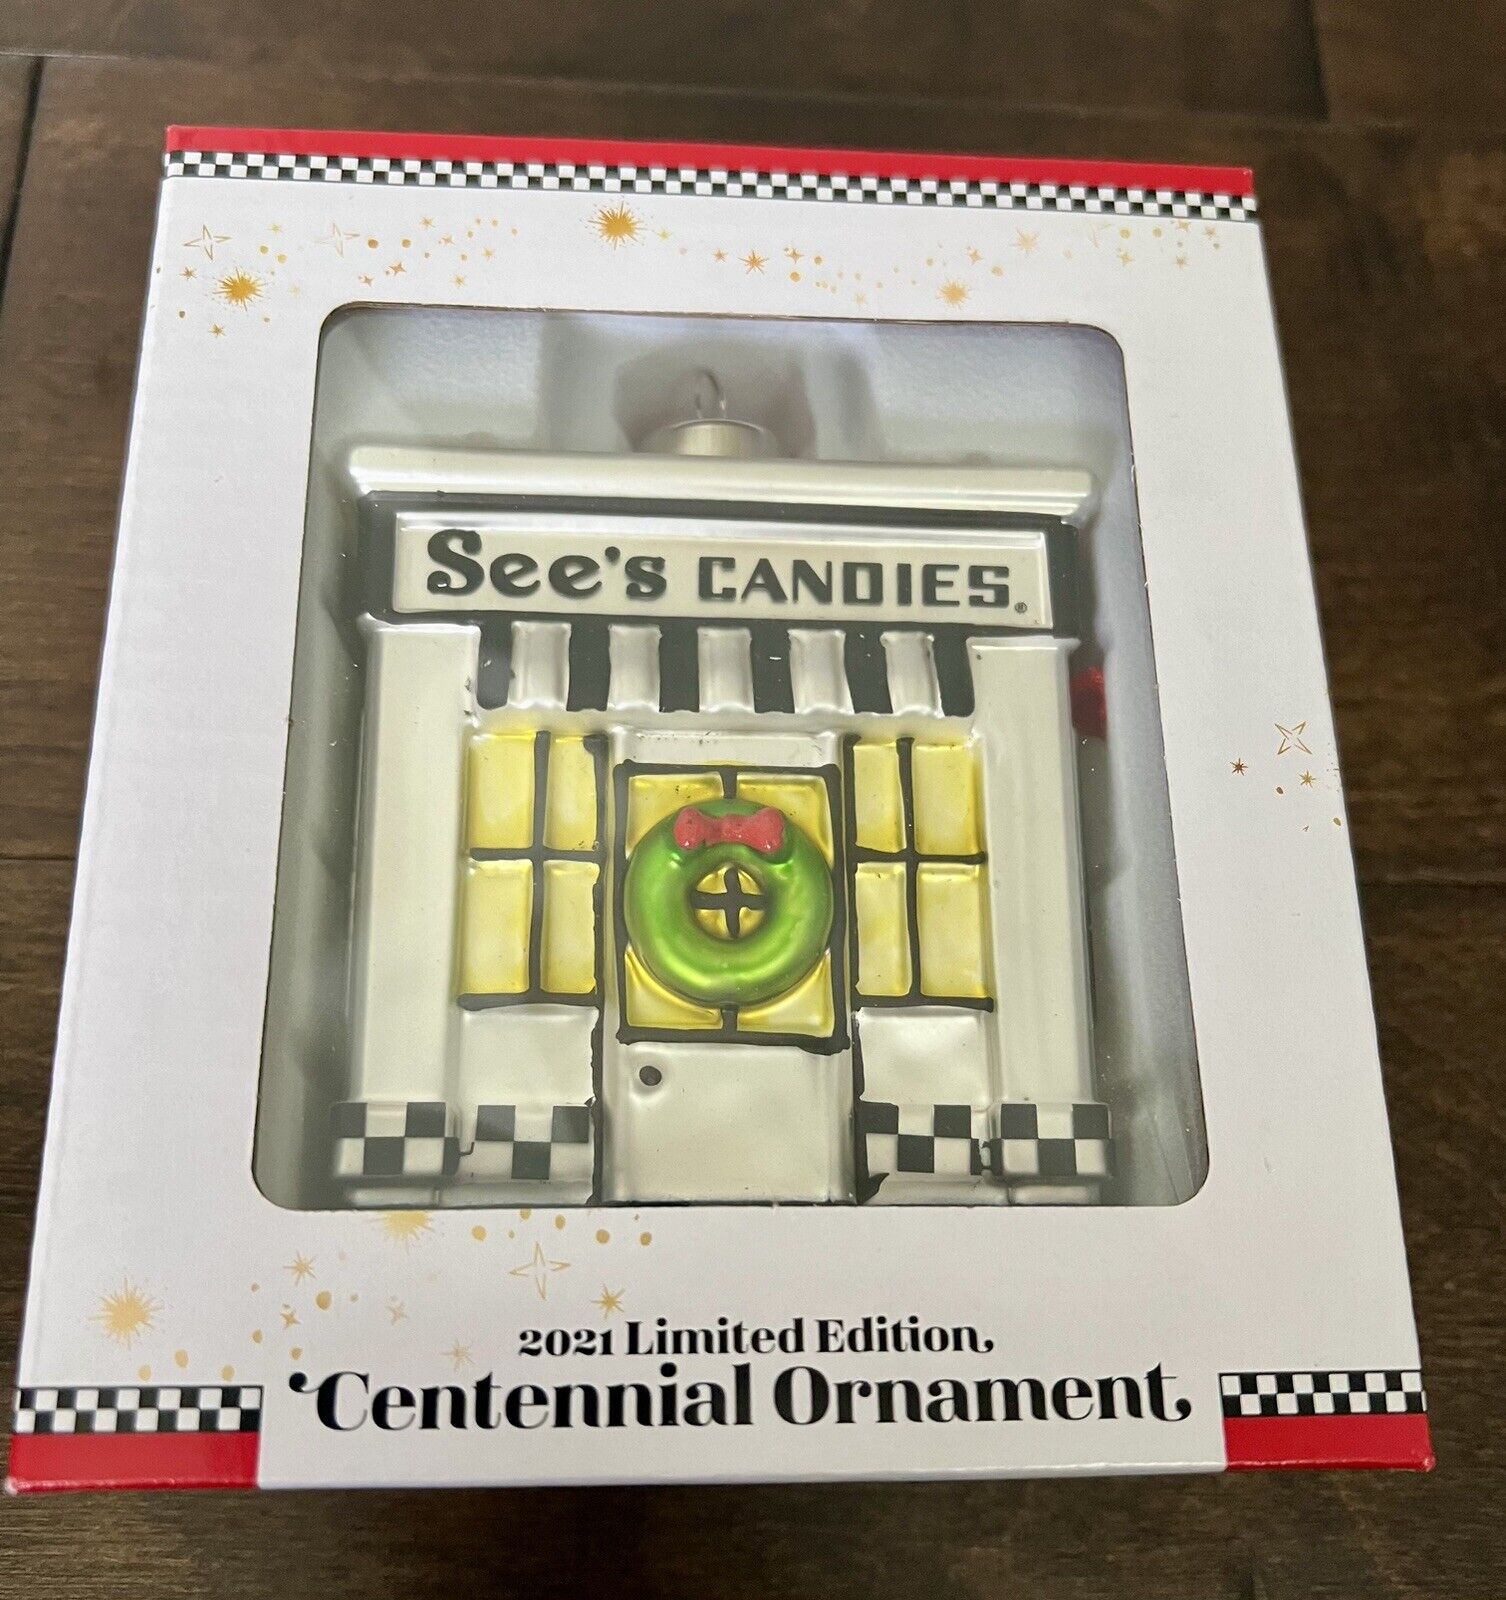 NEW 2021 Limited Edition See\'s Candies 100 Years CENTENNIAL ORNAMENT Christmas